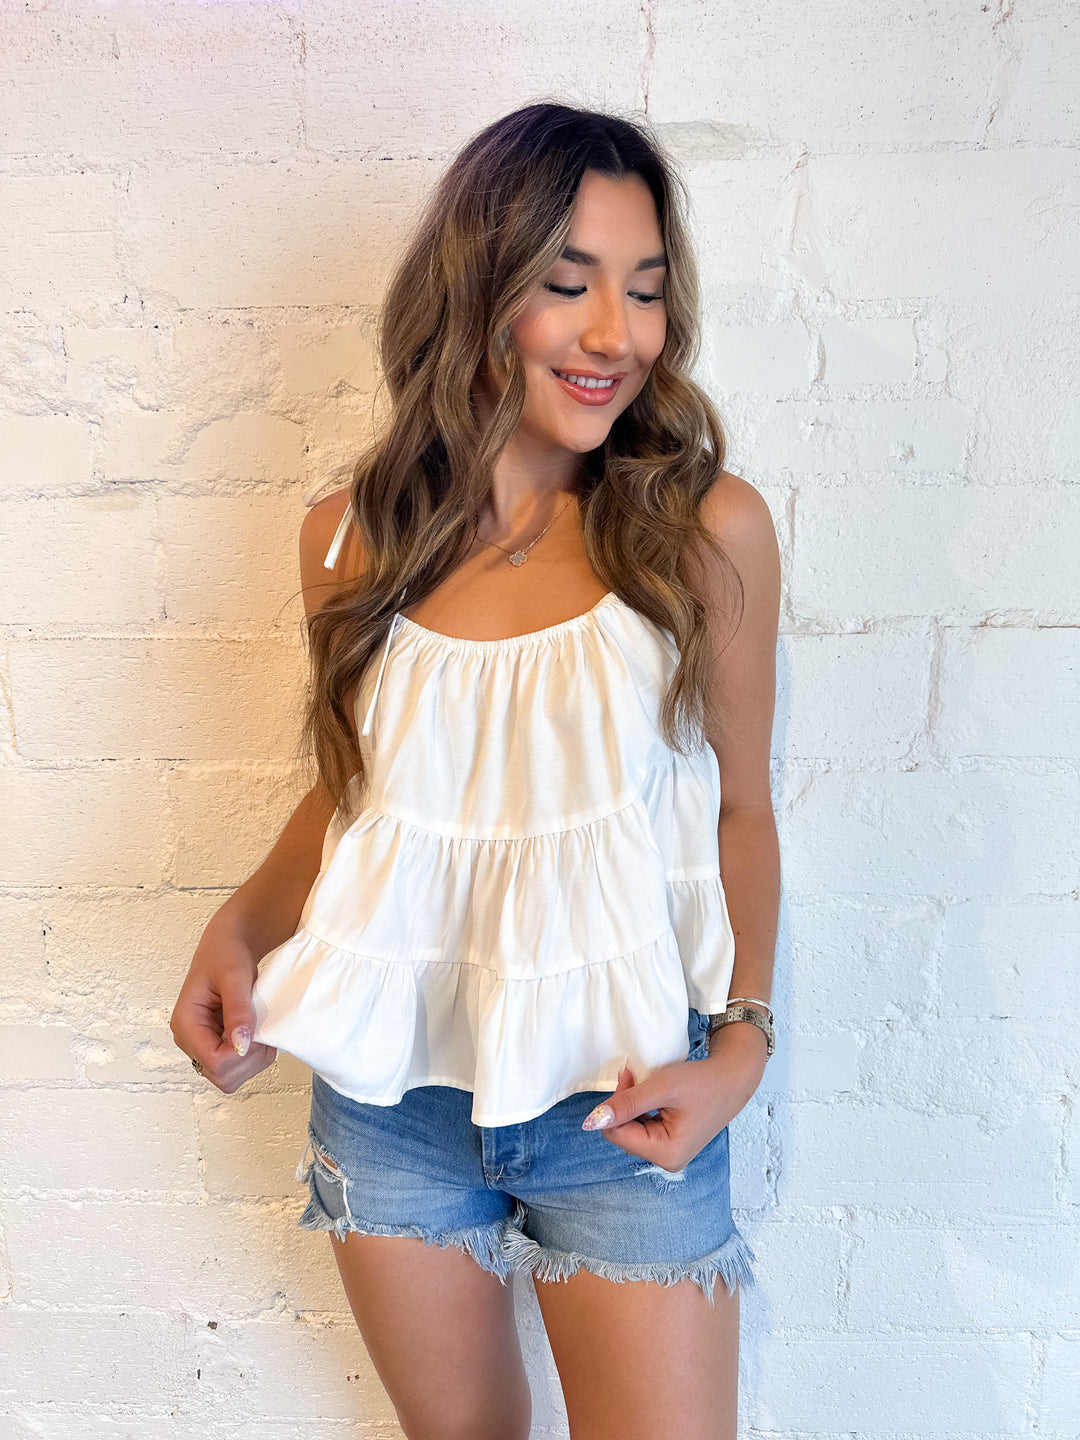 Tessa Tiered Top, Tops, Adeline, Adeline, dallas boutique, dallas texas, texas boutique, women's boutique dallas, adeline boutique, dallas boutique, trendy boutique, affordable boutique